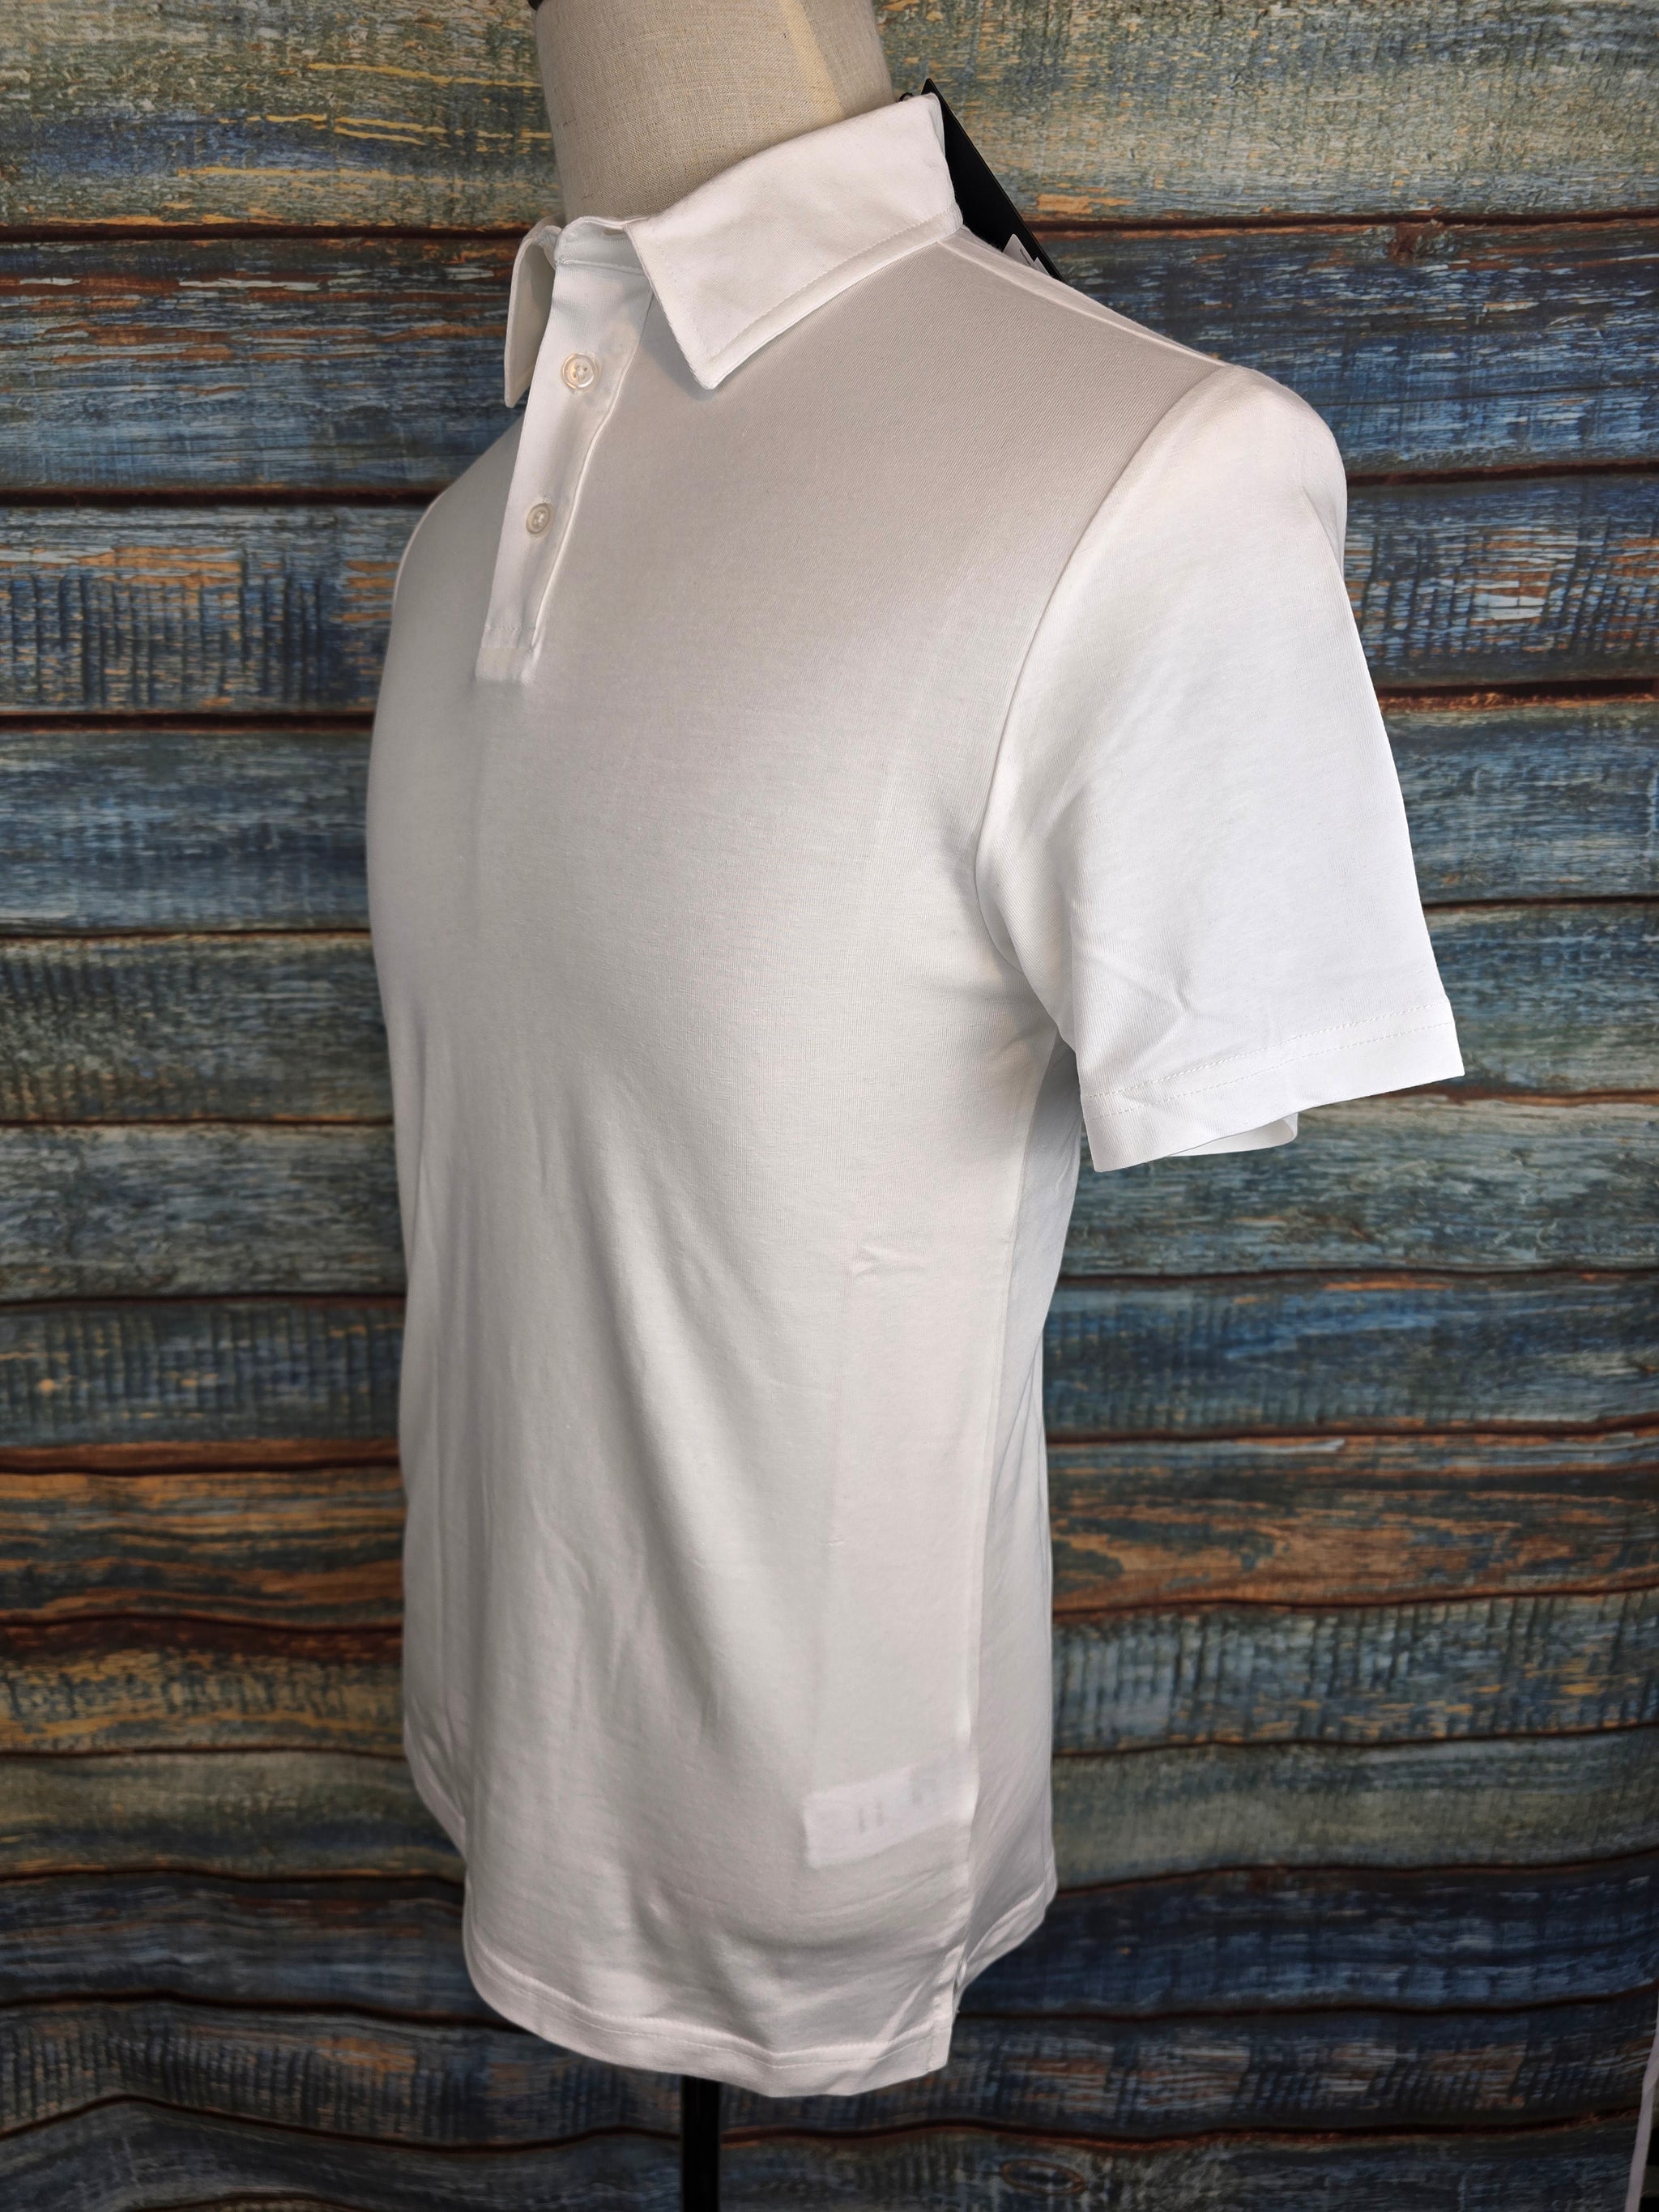 Remus Uomo Tapered Fit Cotton blend Short-Sleeve Polo Shirt